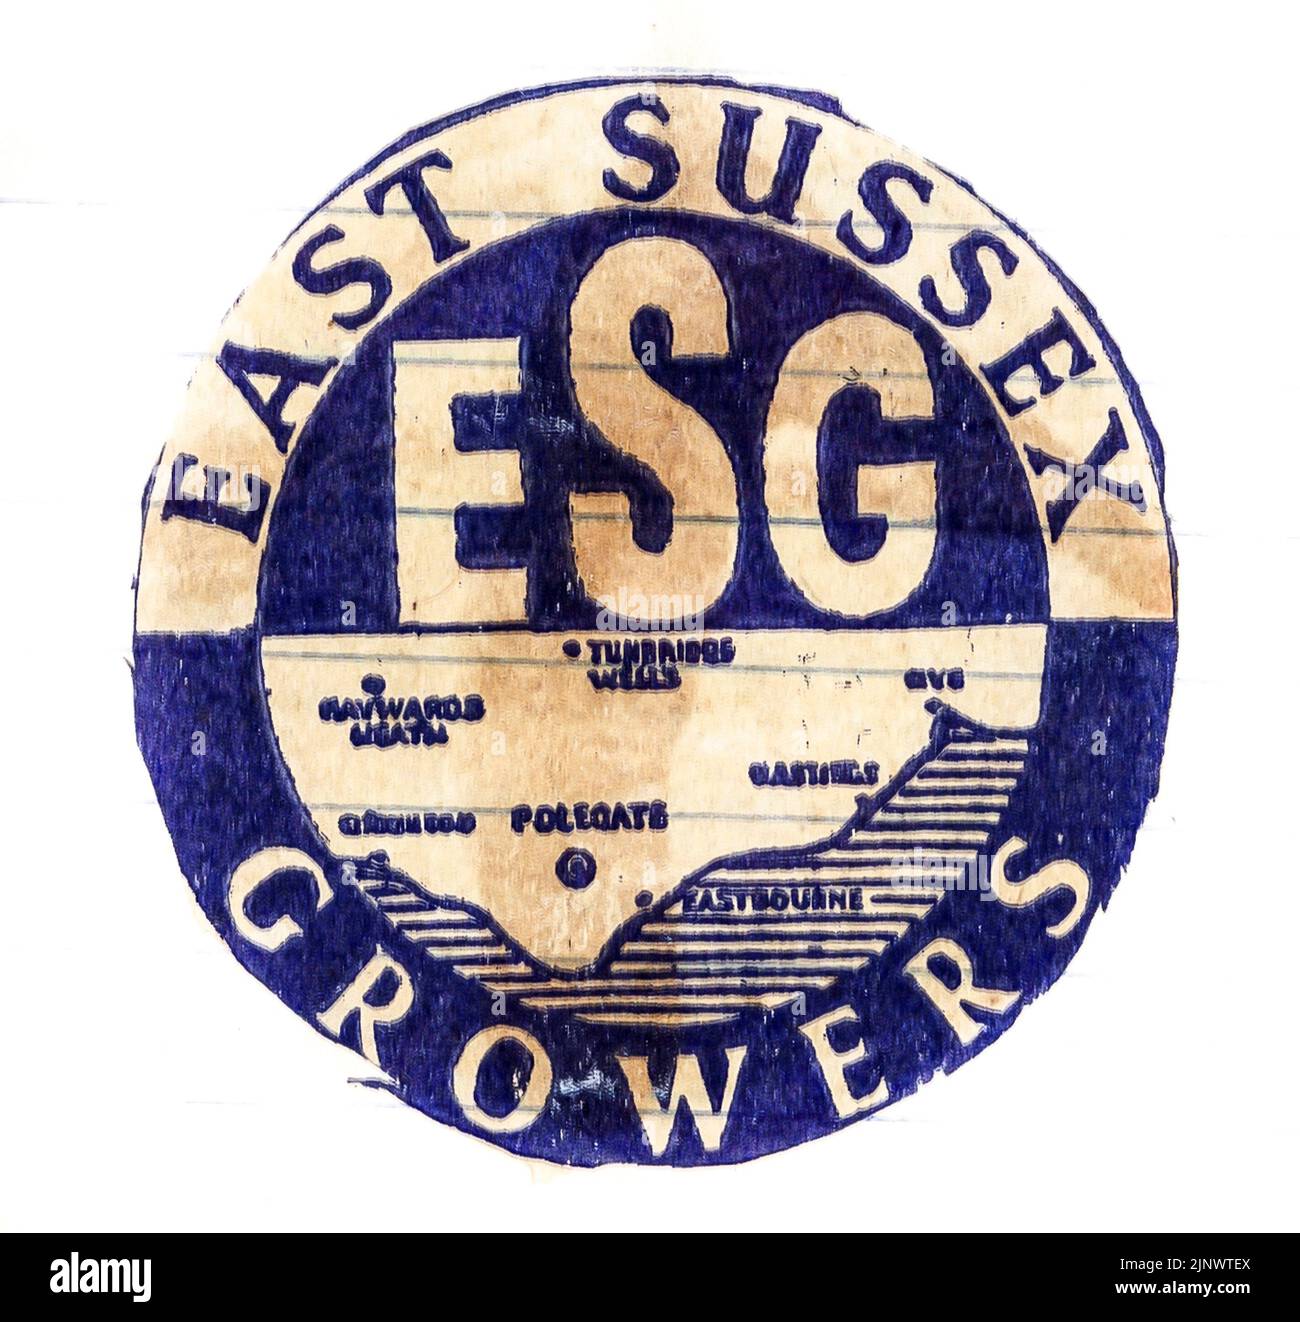 Fresh fruit tissue paper wrapper, from mid-1950s England, with grower's trade mark. ESG, East Sussex Growers. Blue and white map of Sussex, England. Stock Photo